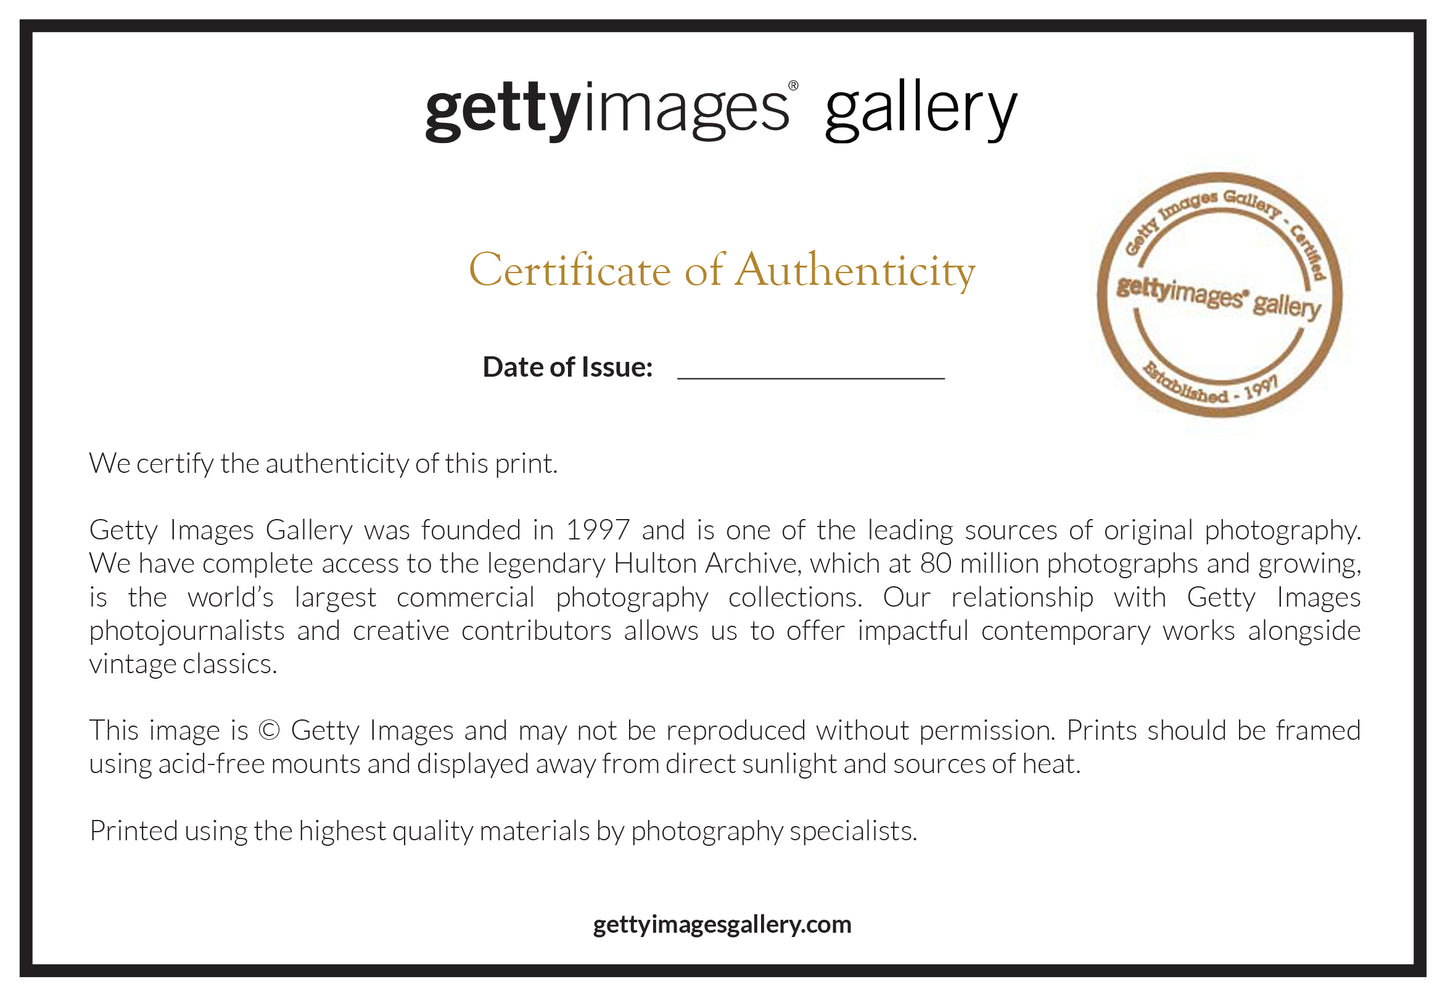 Getty Images Gallery certificate of authenticity